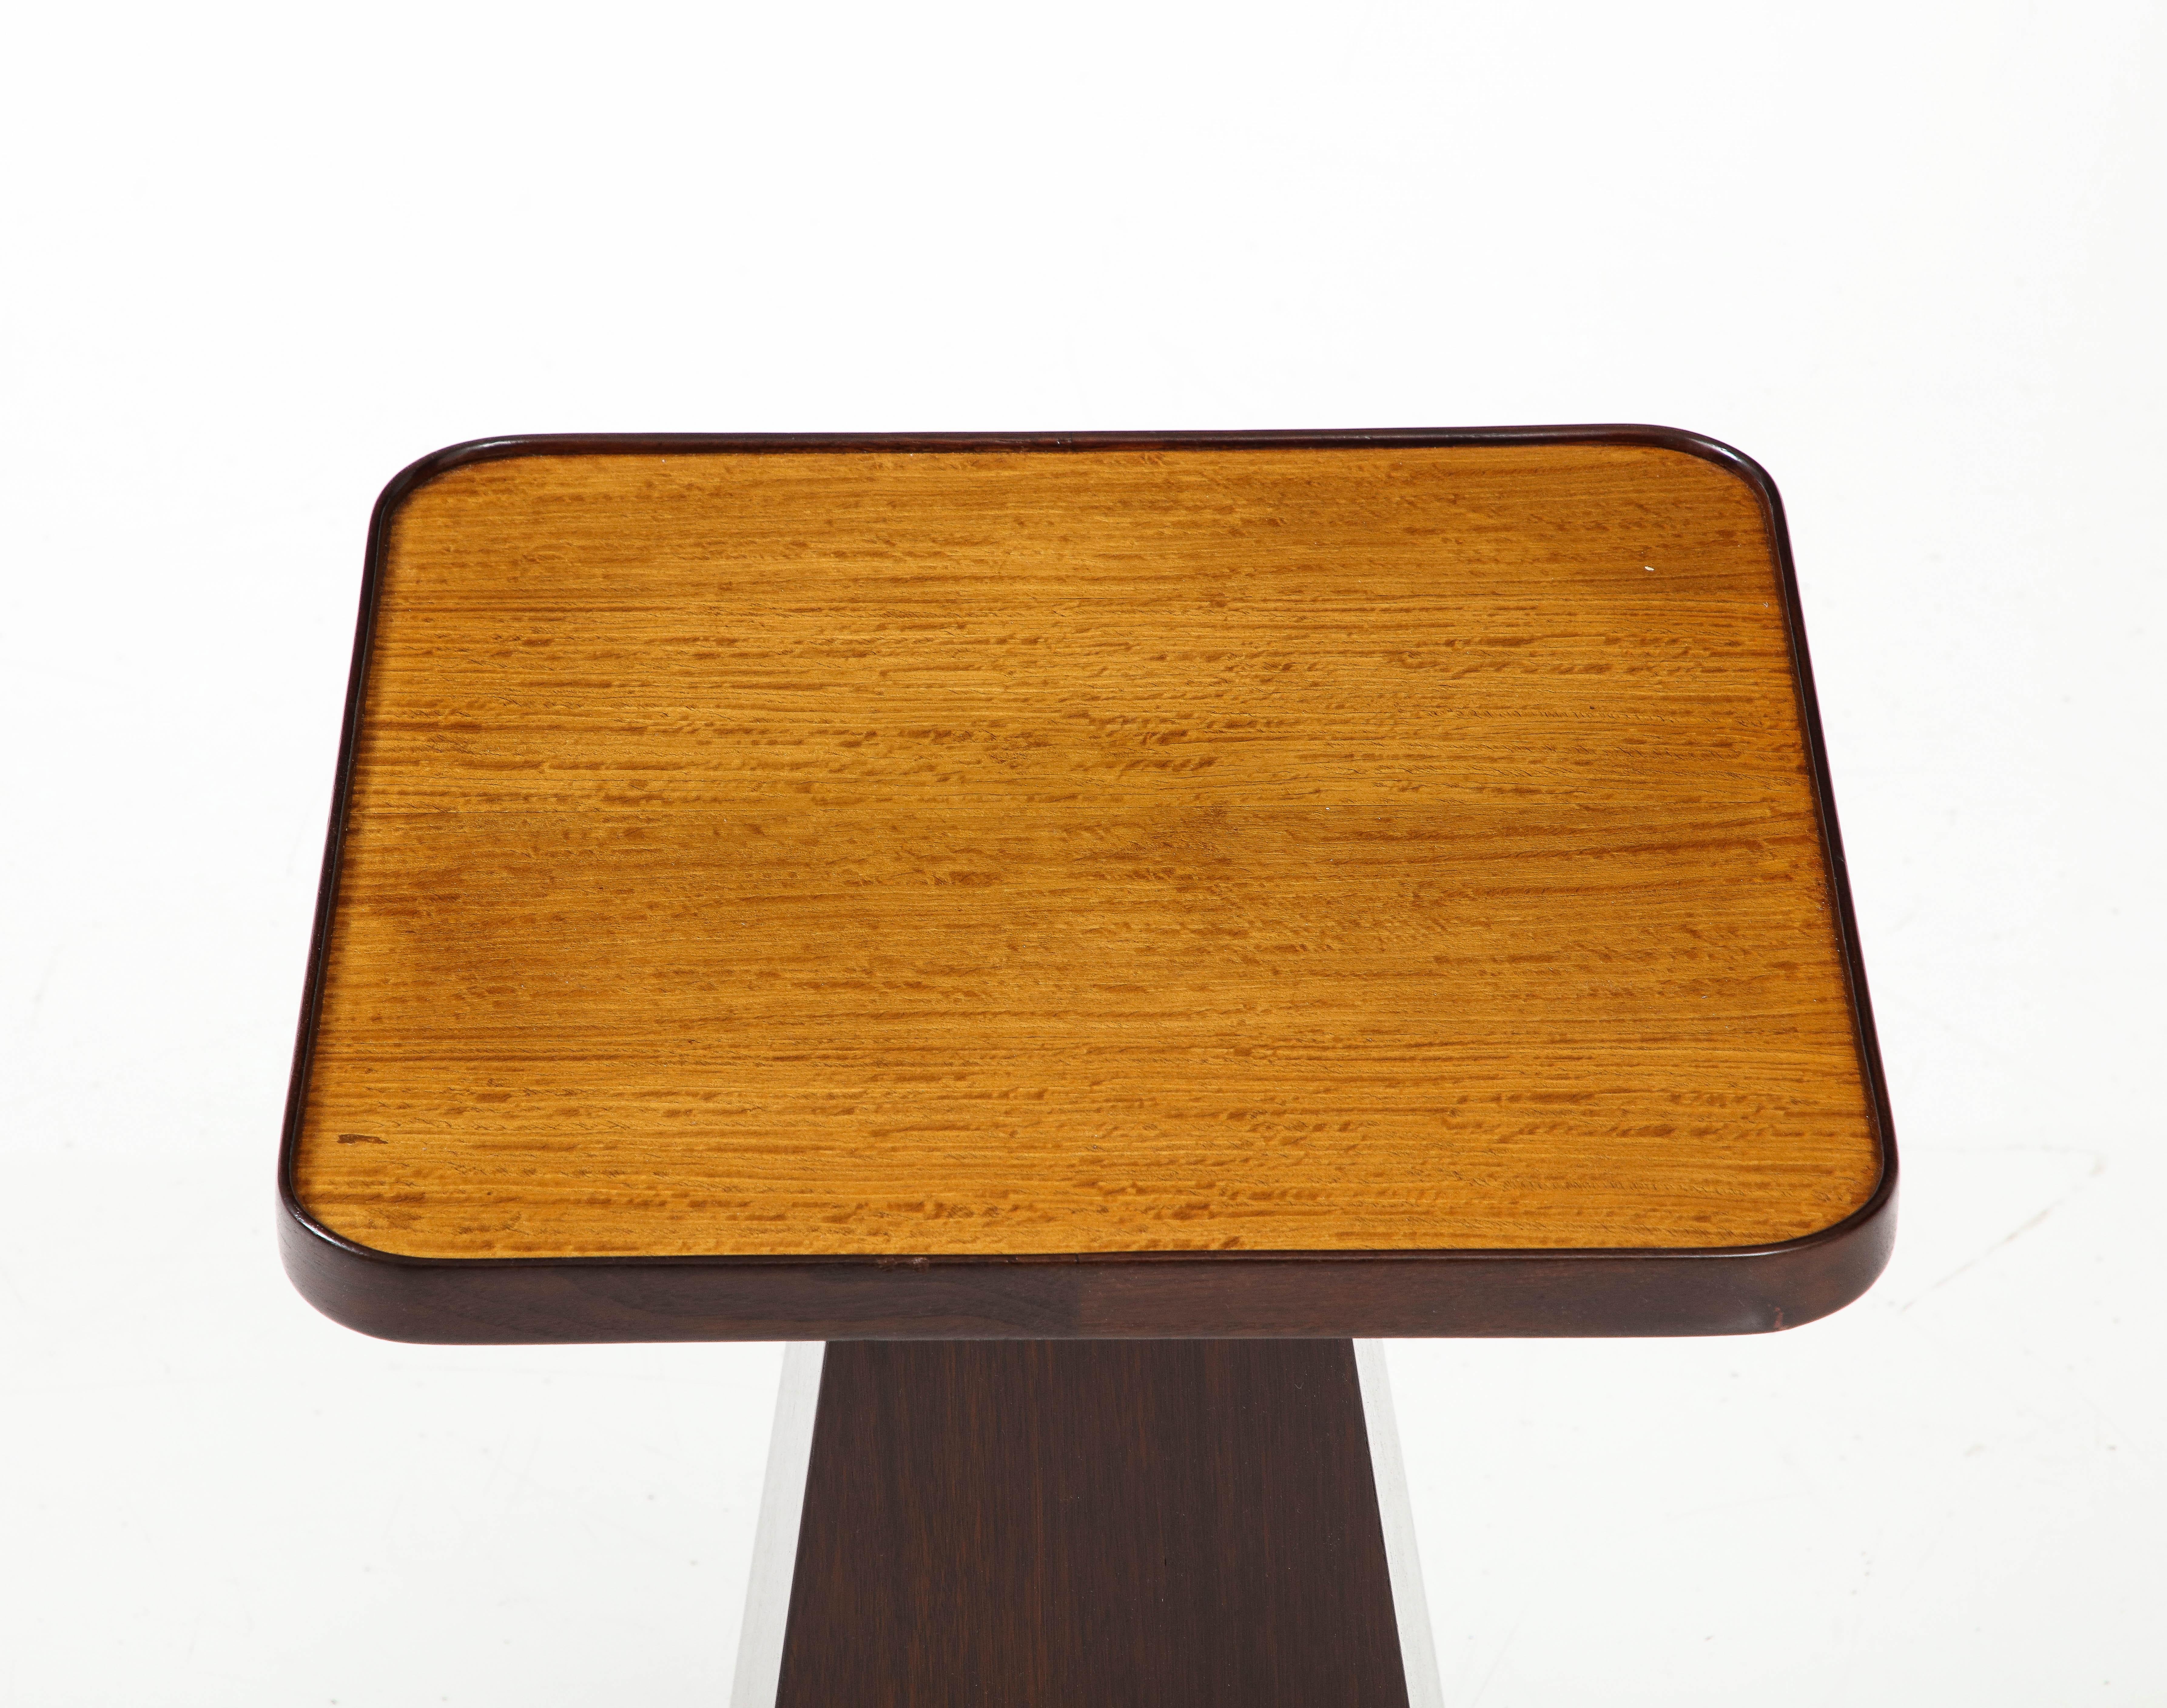 1970's mid-century modern walnut and lacquer architectural square side table, fully restored with minor wear and patina due to age and use. 